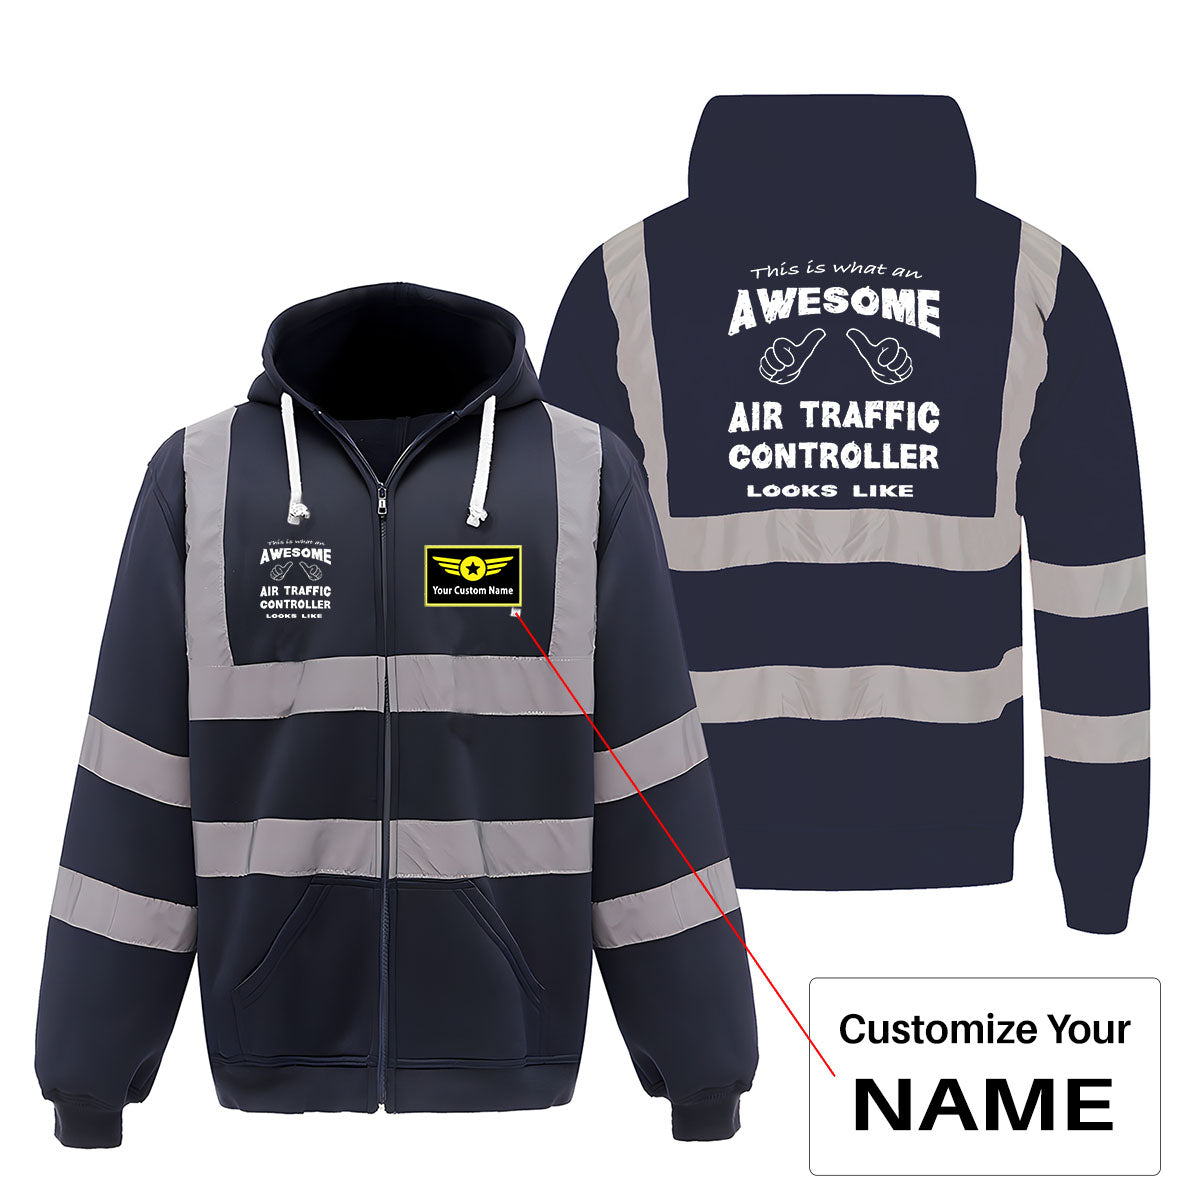 Air Traffic Controller Designed Reflective Zipped Hoodies